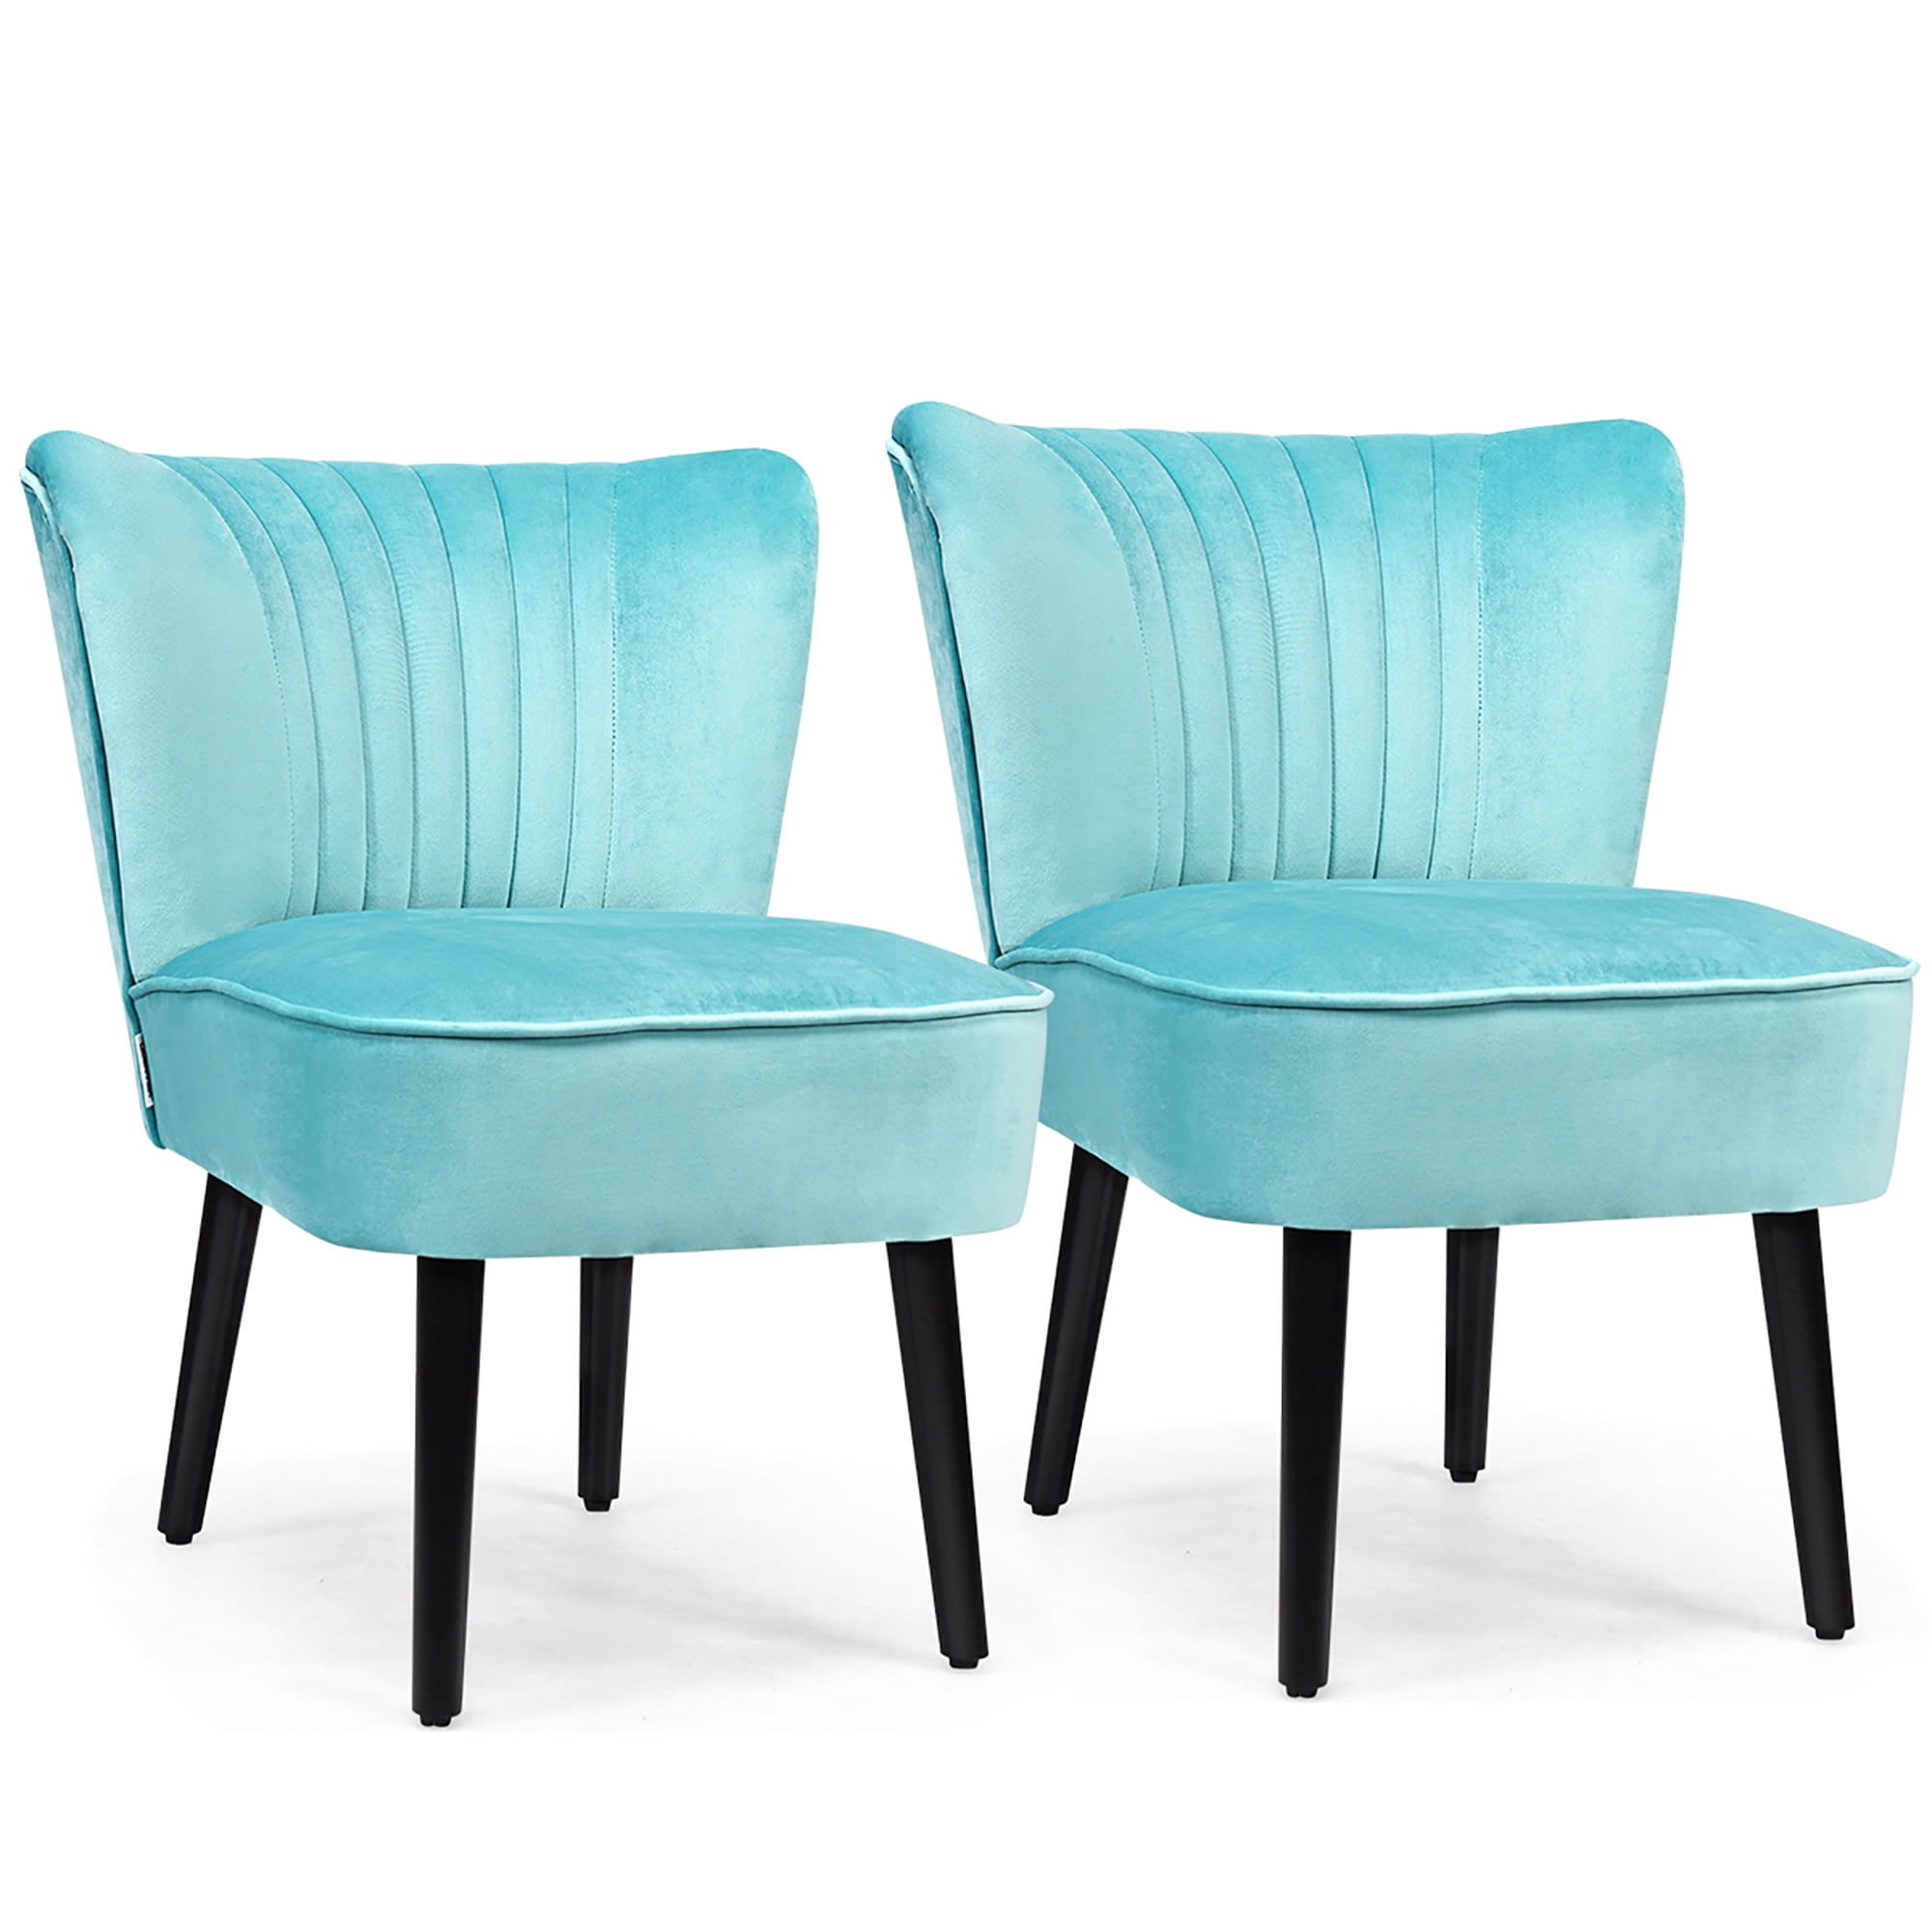 Costway Set of 2 Armless Accent Chair Upholstered Leisure Chair Single